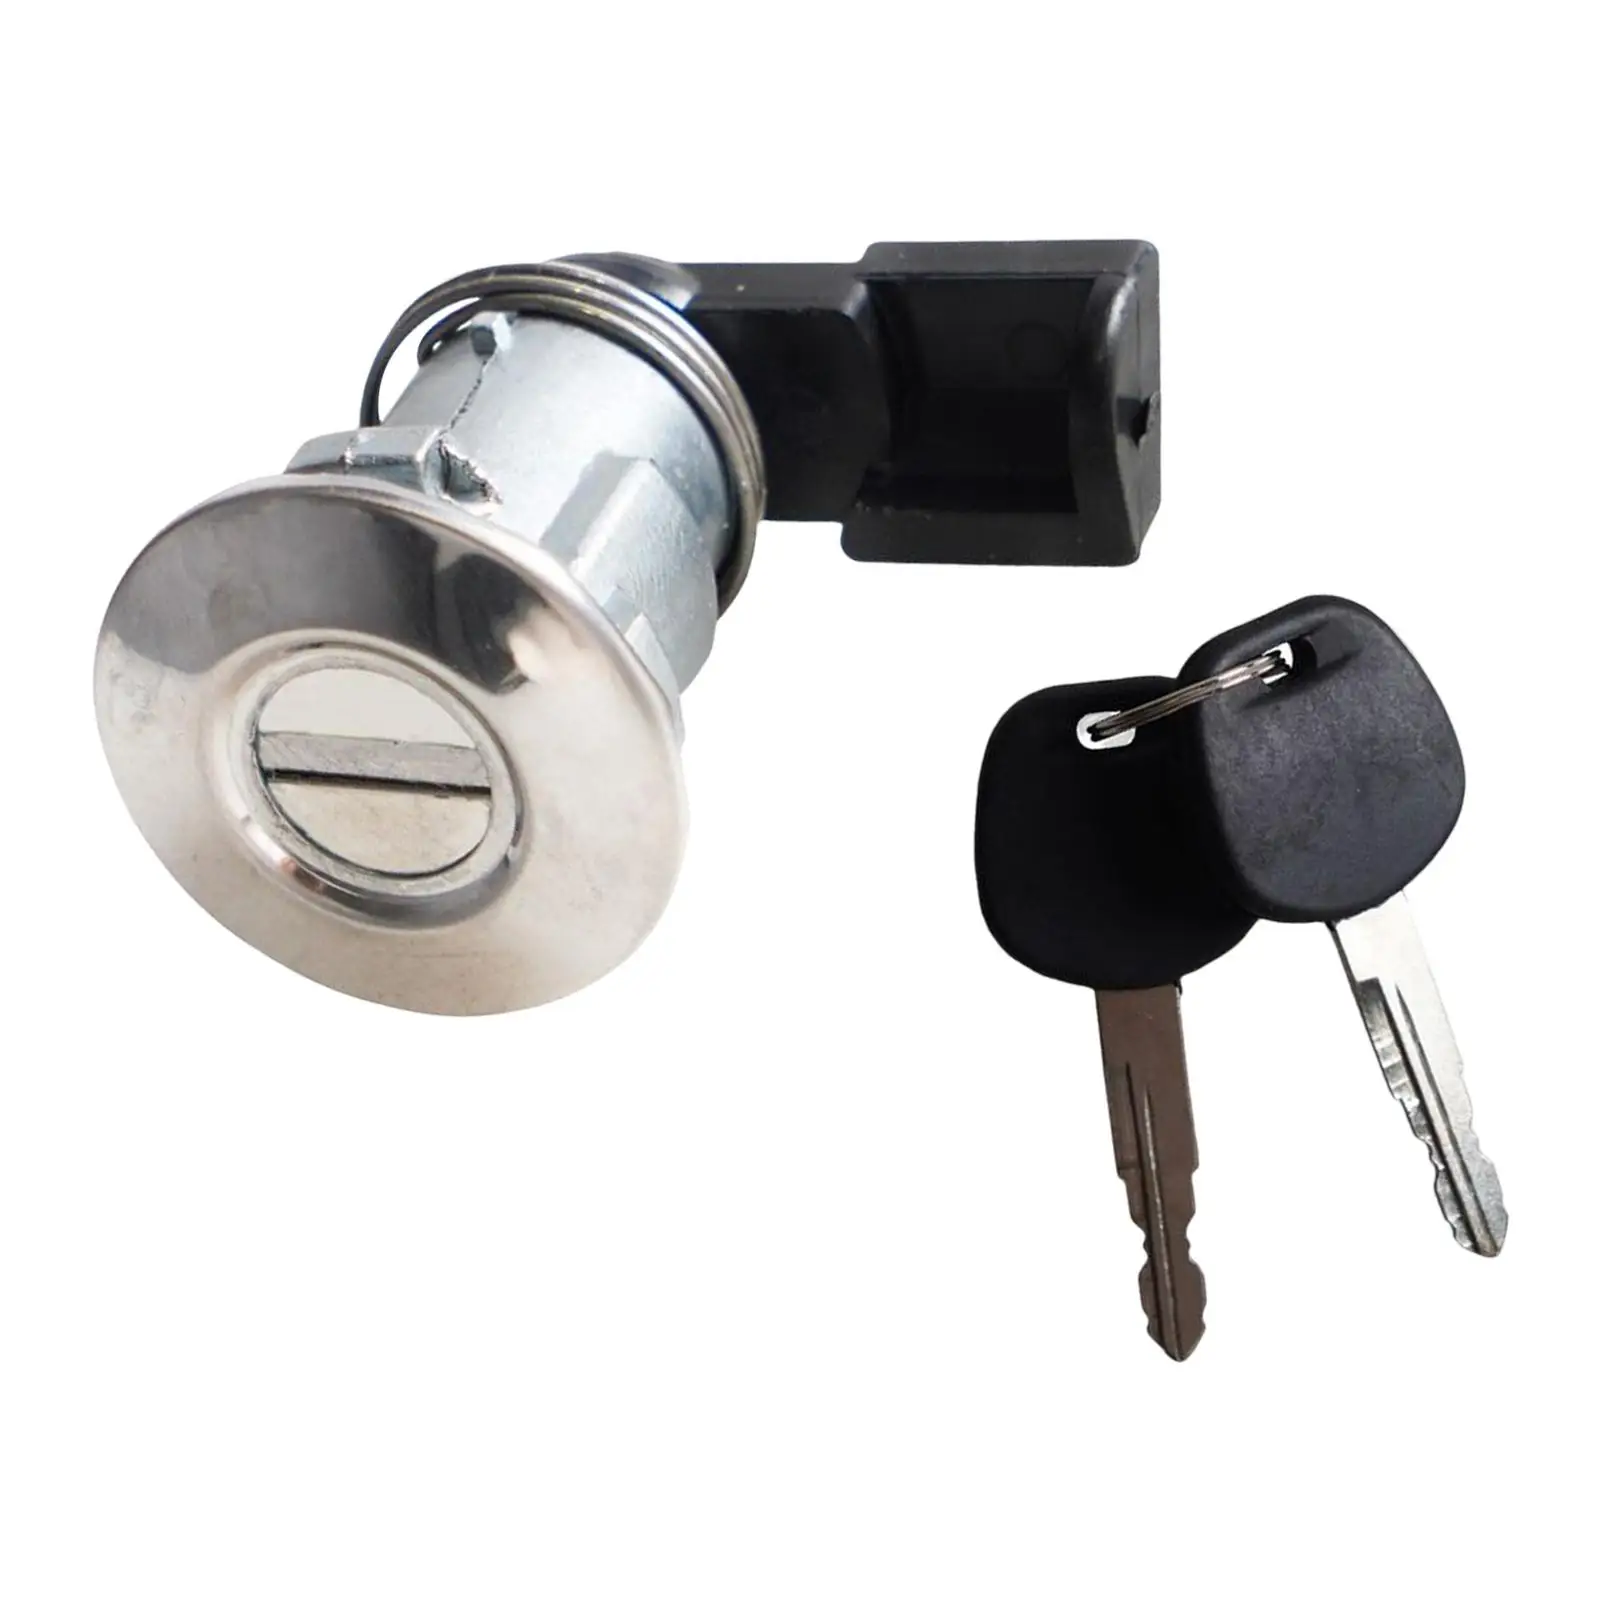 Metal Fuel Door Lock Cylinder Replaces Sealed with 2Pcs Keys 6905835140 Car for 1995-2004 Parts Accessories